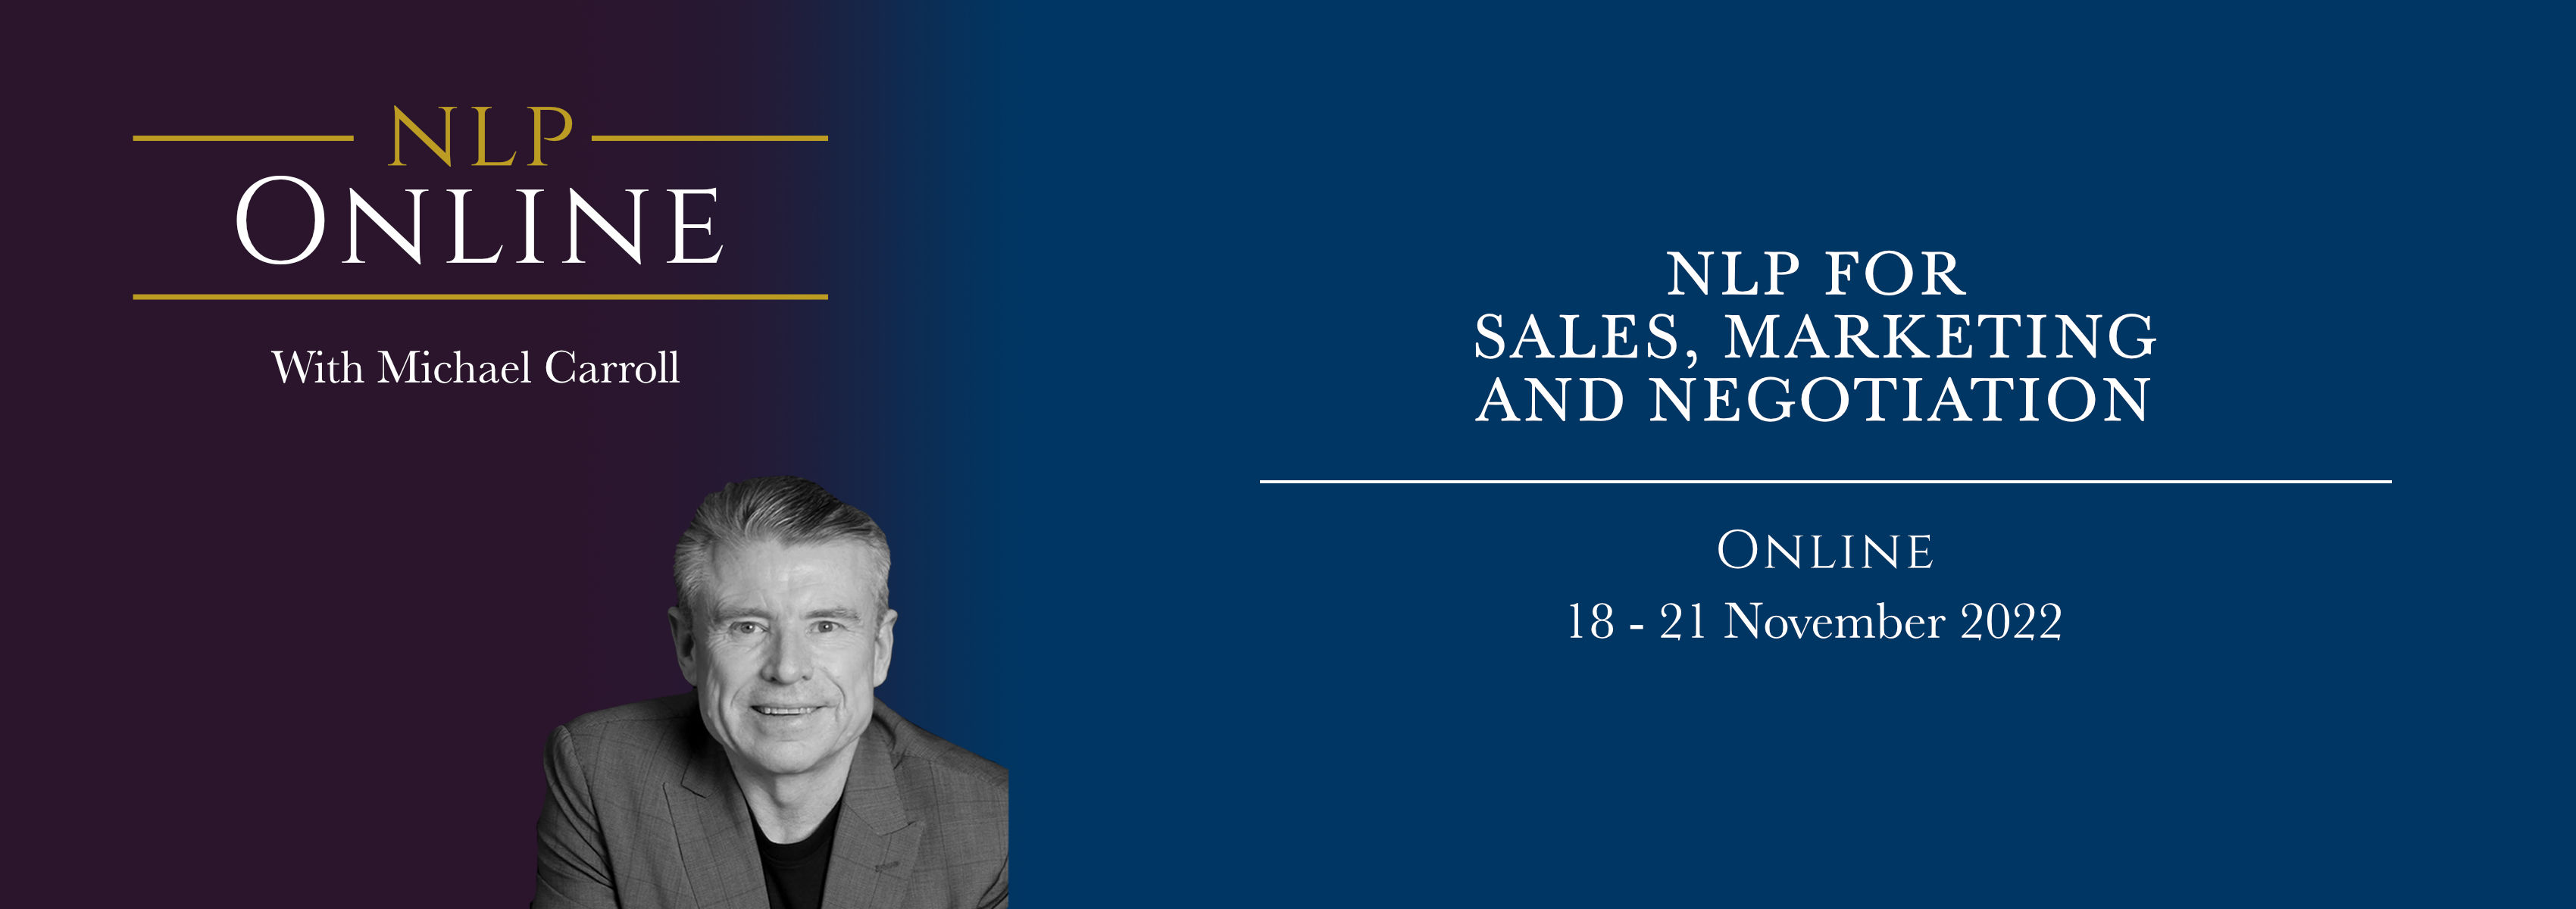 NLP for Sales, Marketing and Negotiation